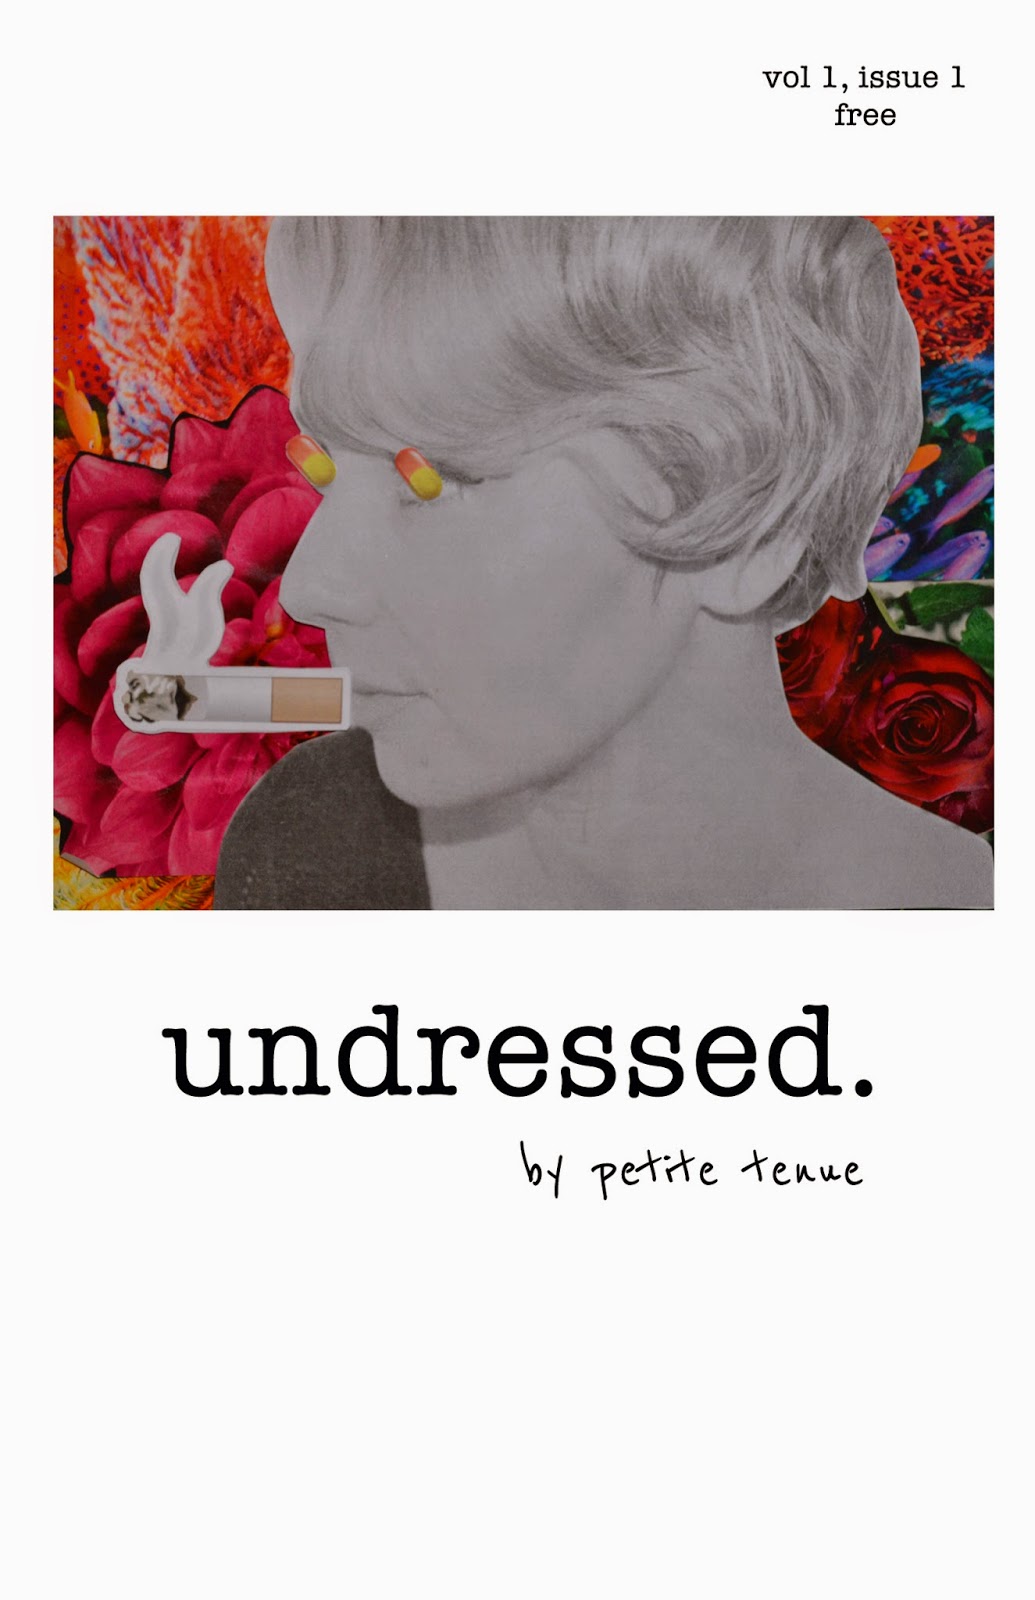 undressed, by petite tenue: vol 1 issue 1